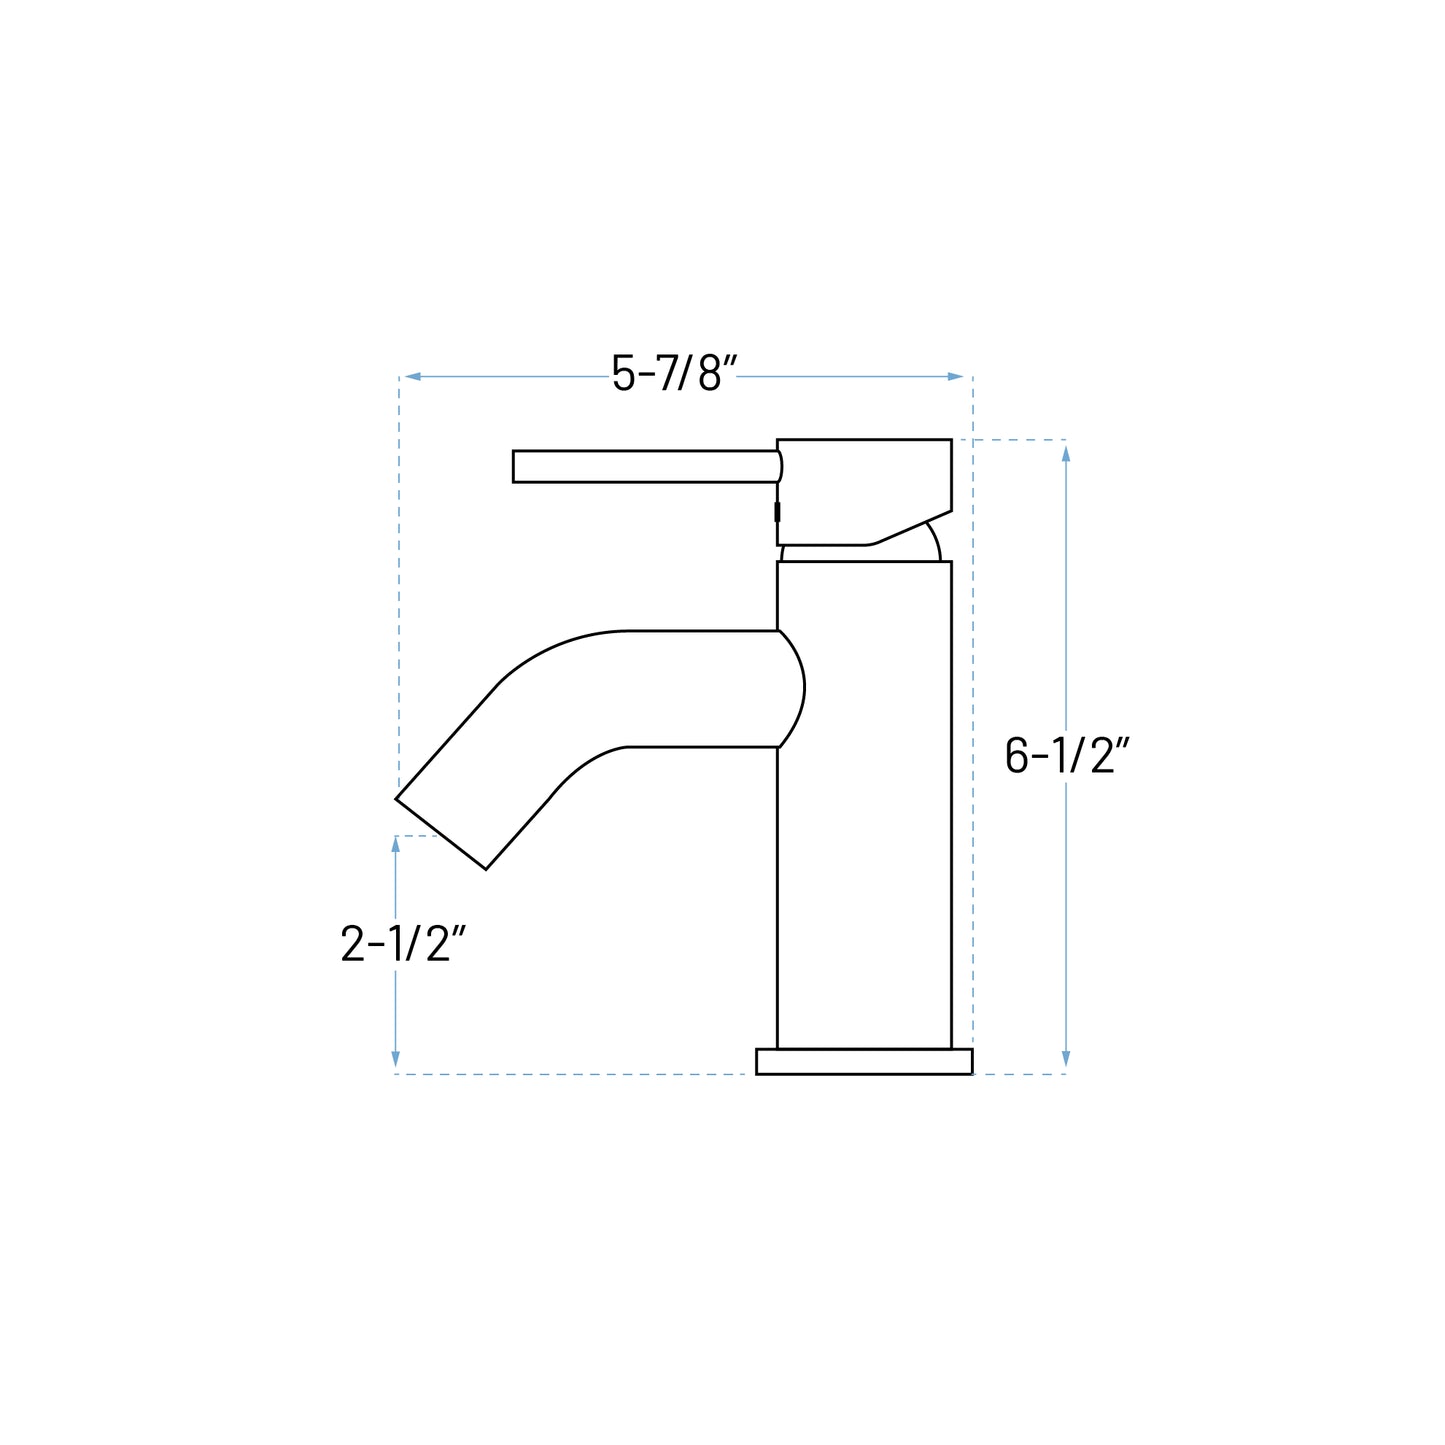 Technical Drawing of a Single Handle Bathroom Faucet